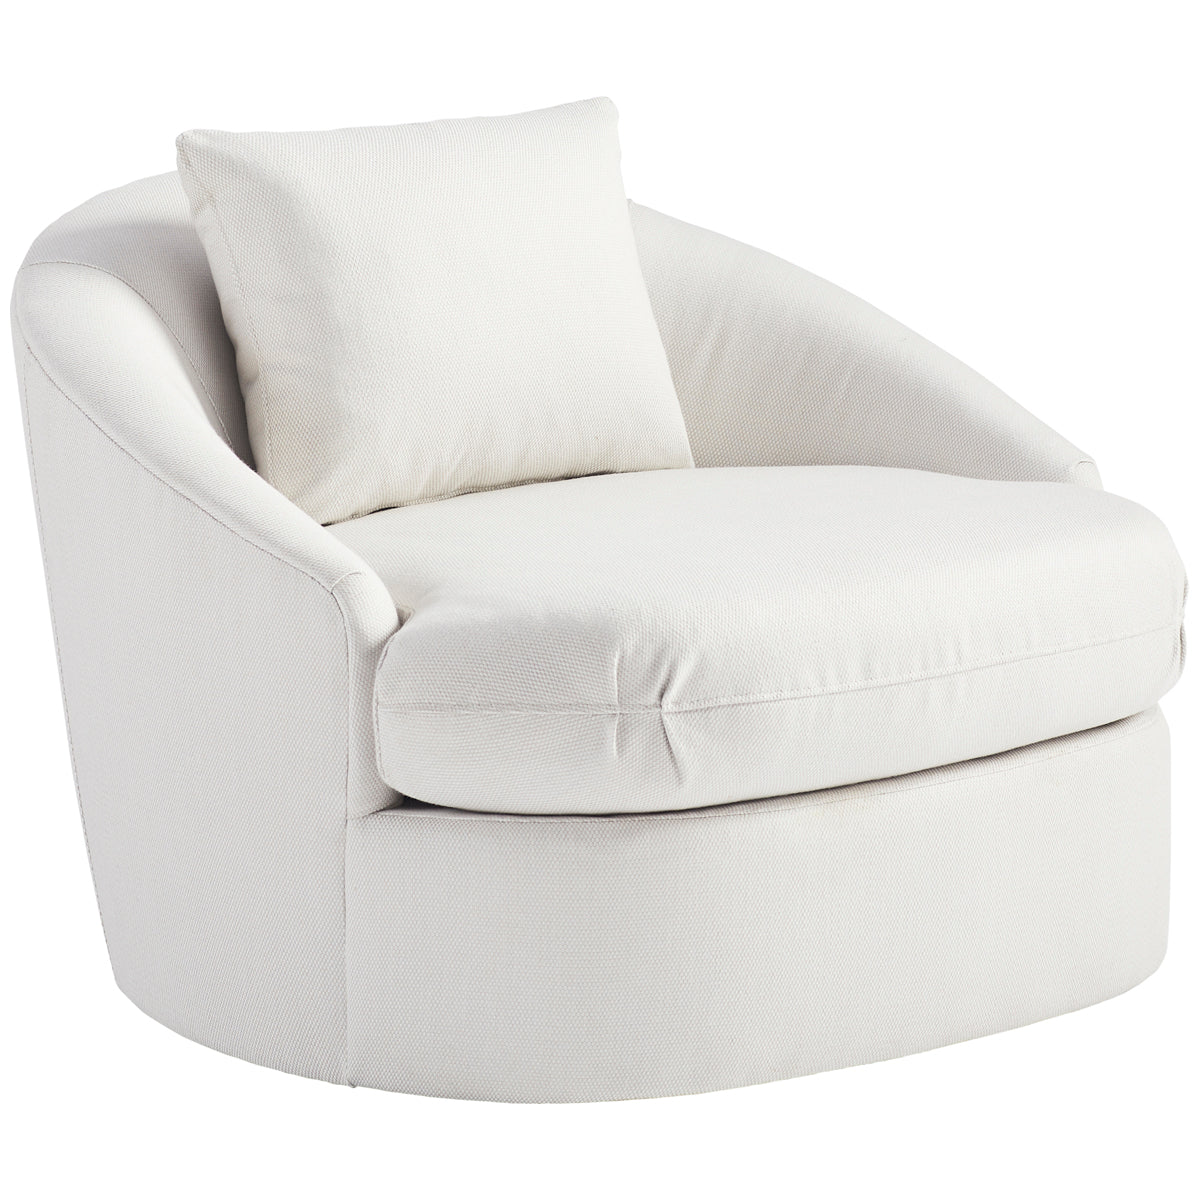 Lillian August Cabo Outdoor Swivel Chair